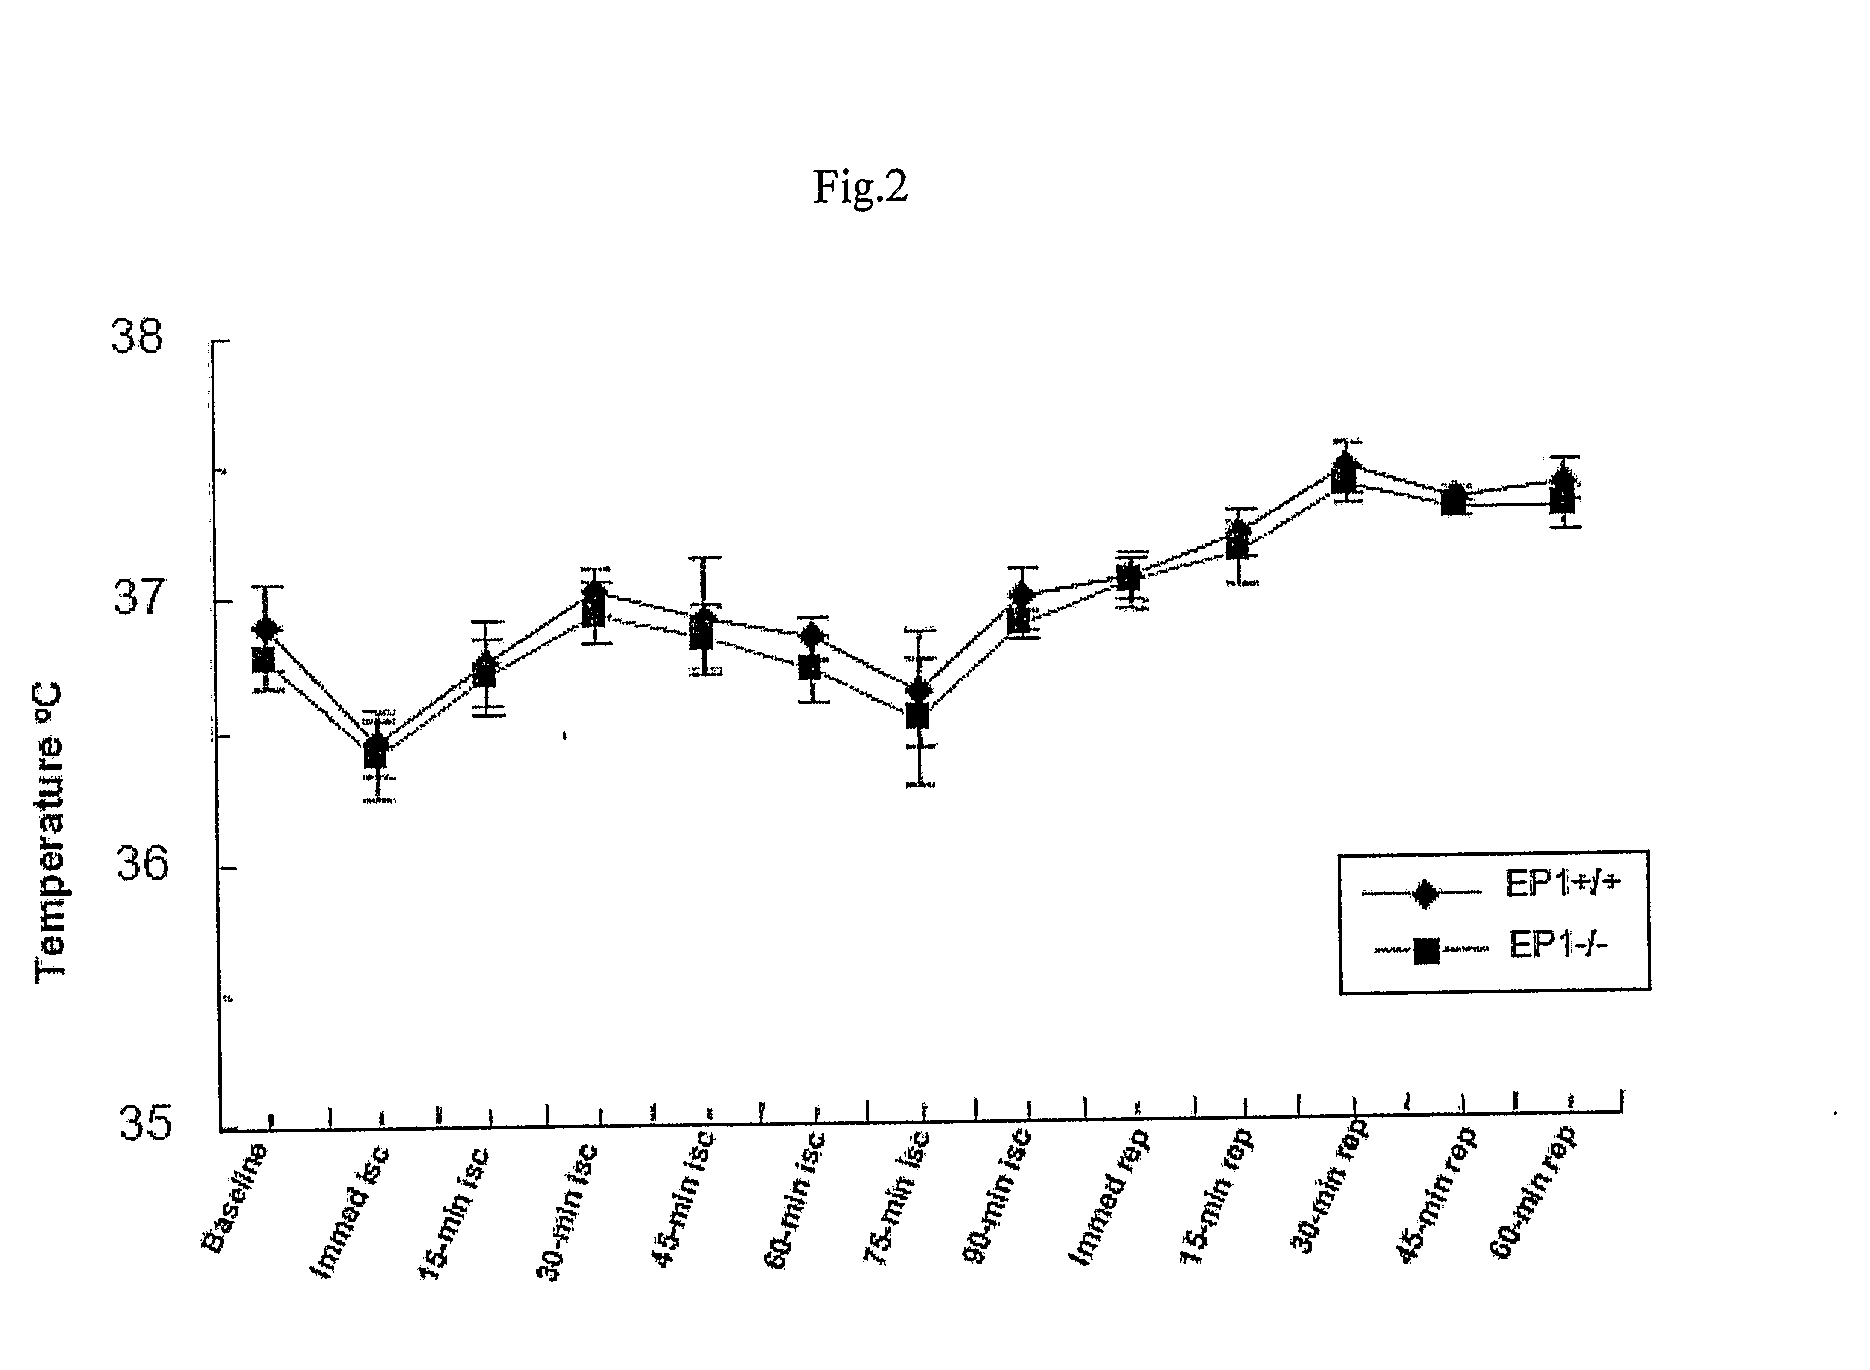 Method for the Prevention and/or Treatment of Neurodegenerative Diseases Characterized by Administering and Ep1 Receptor Antagonist